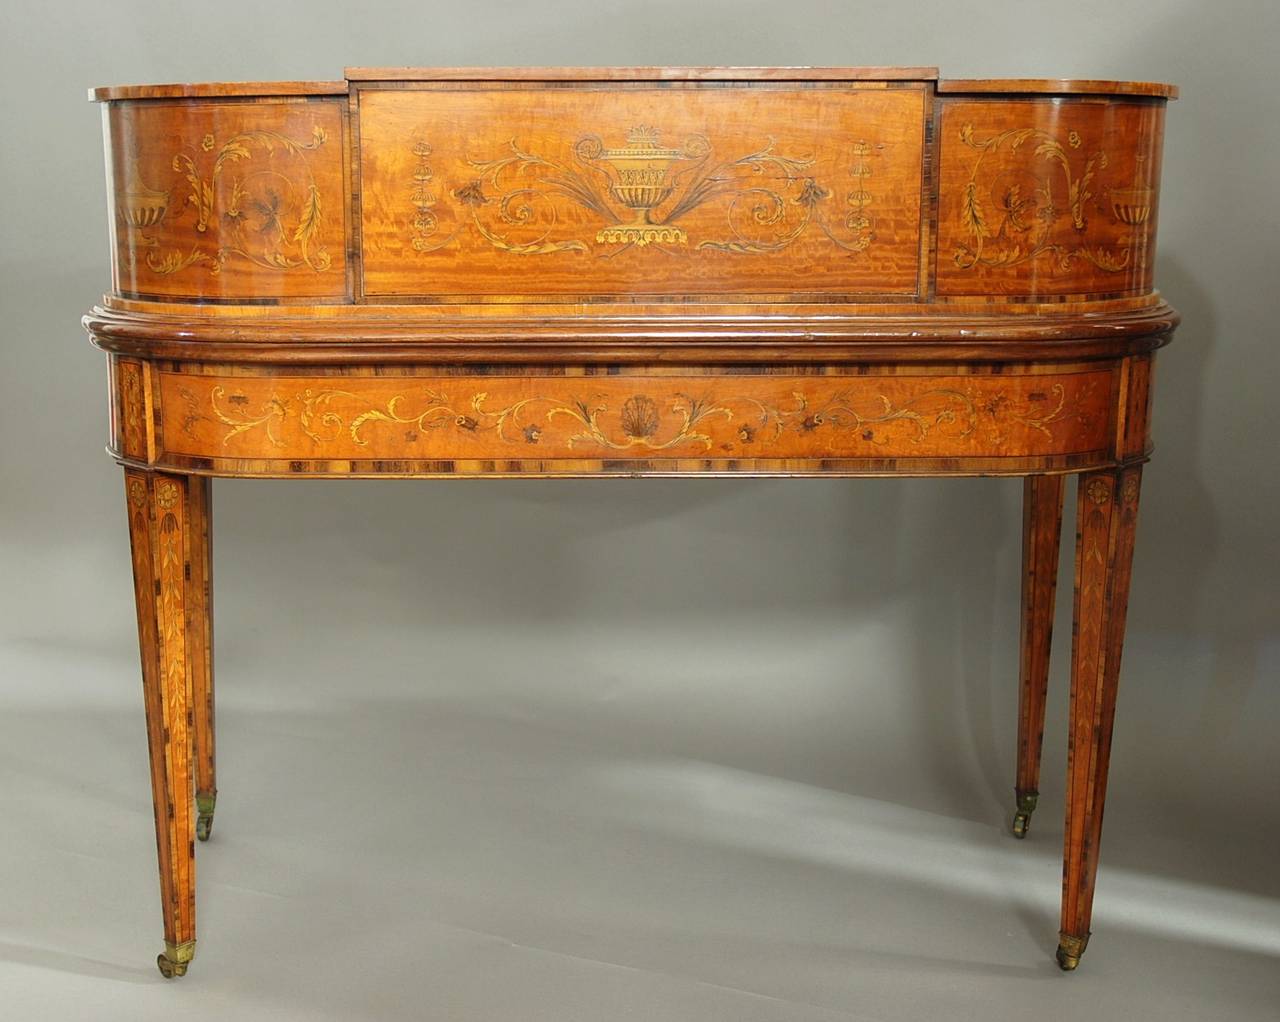 English Exhibition quality satinwood inlaid Carlton House desk in the Classical form